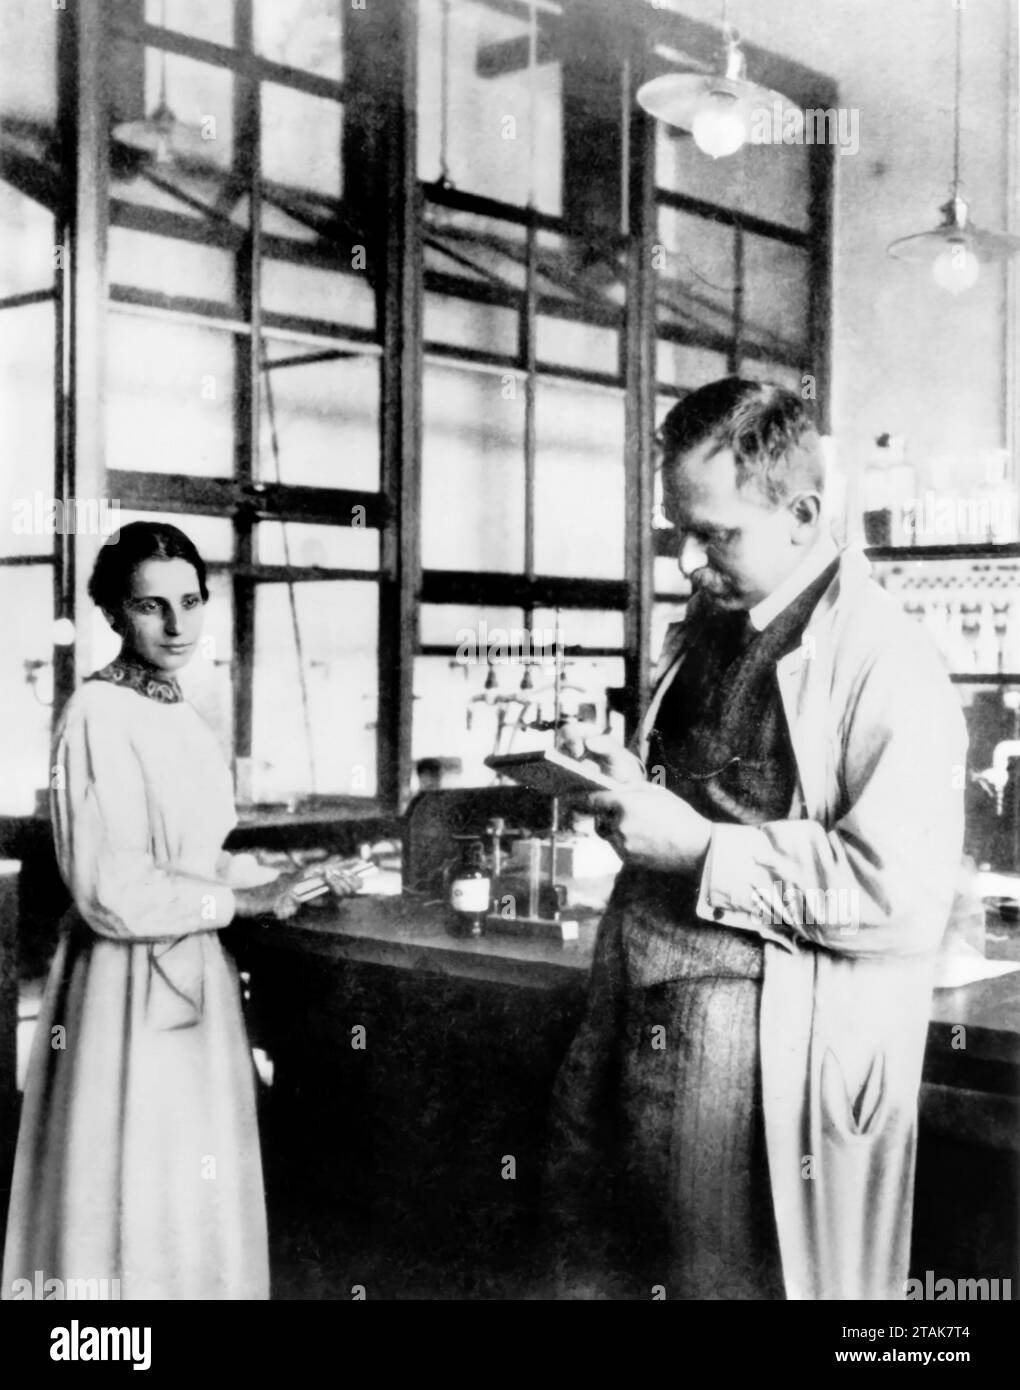 Otto Hahn and Lise Meitner. The Austrian-Swedish physicist, Lise Meitner (b. Elise Meitner, 1878-1968) and the German chemist, Otto Hahn (1879-1968)  in the chemical laboratory of the Kaiser Wilhelm Institute for Chemistry, 1913 Stock Photo